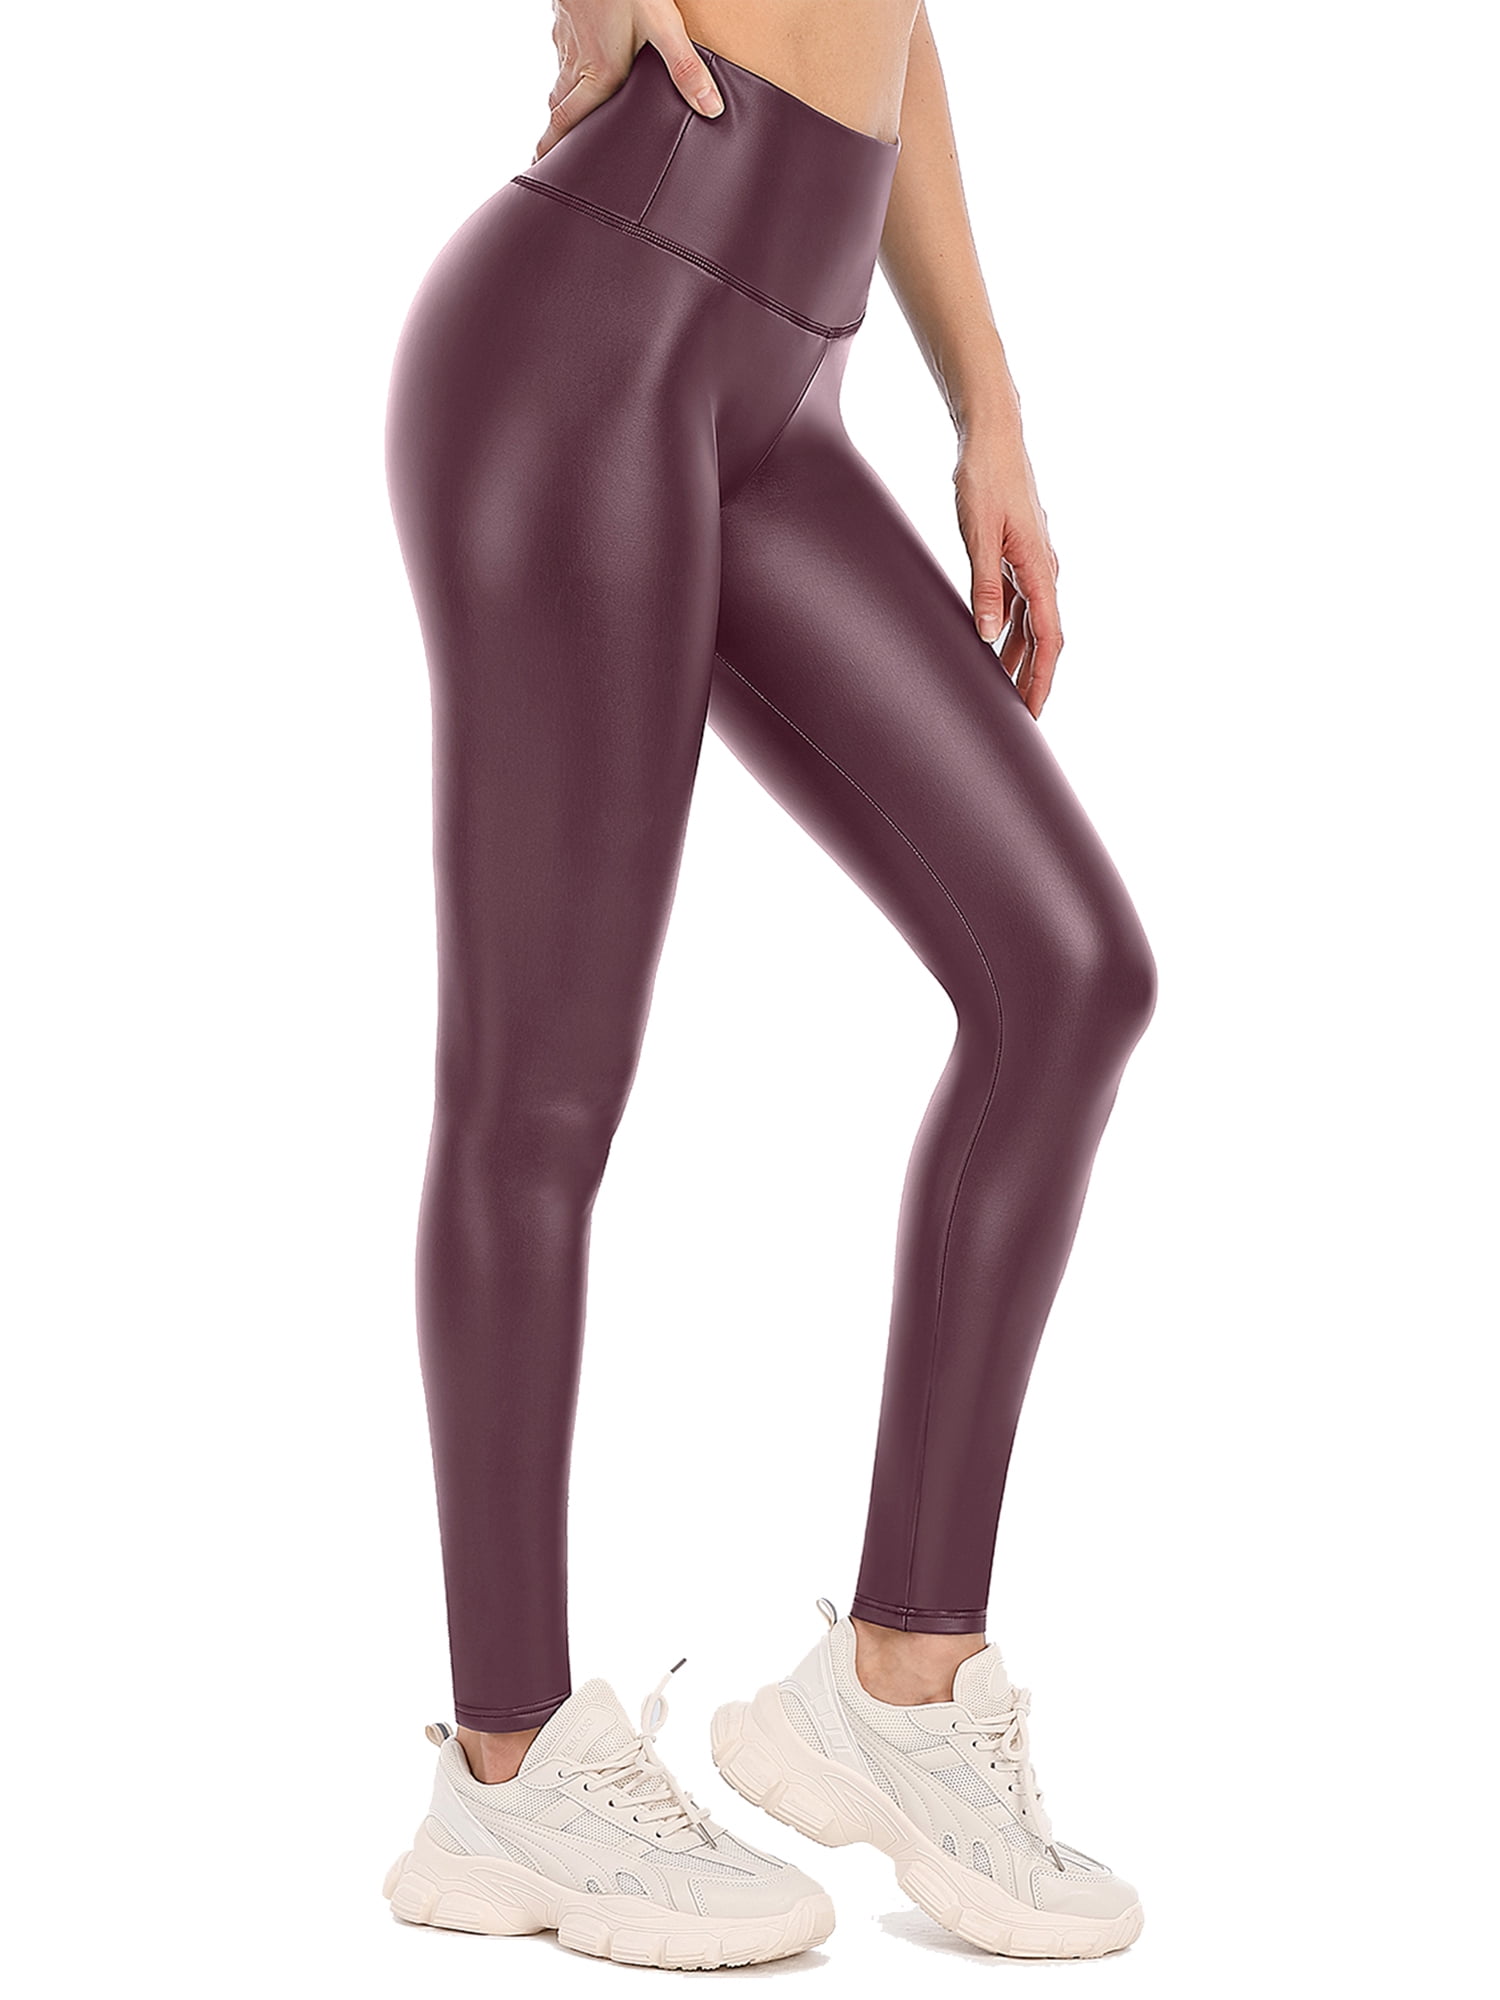 Women's Stretchy Faux Leather Leggings Pants High Waisted